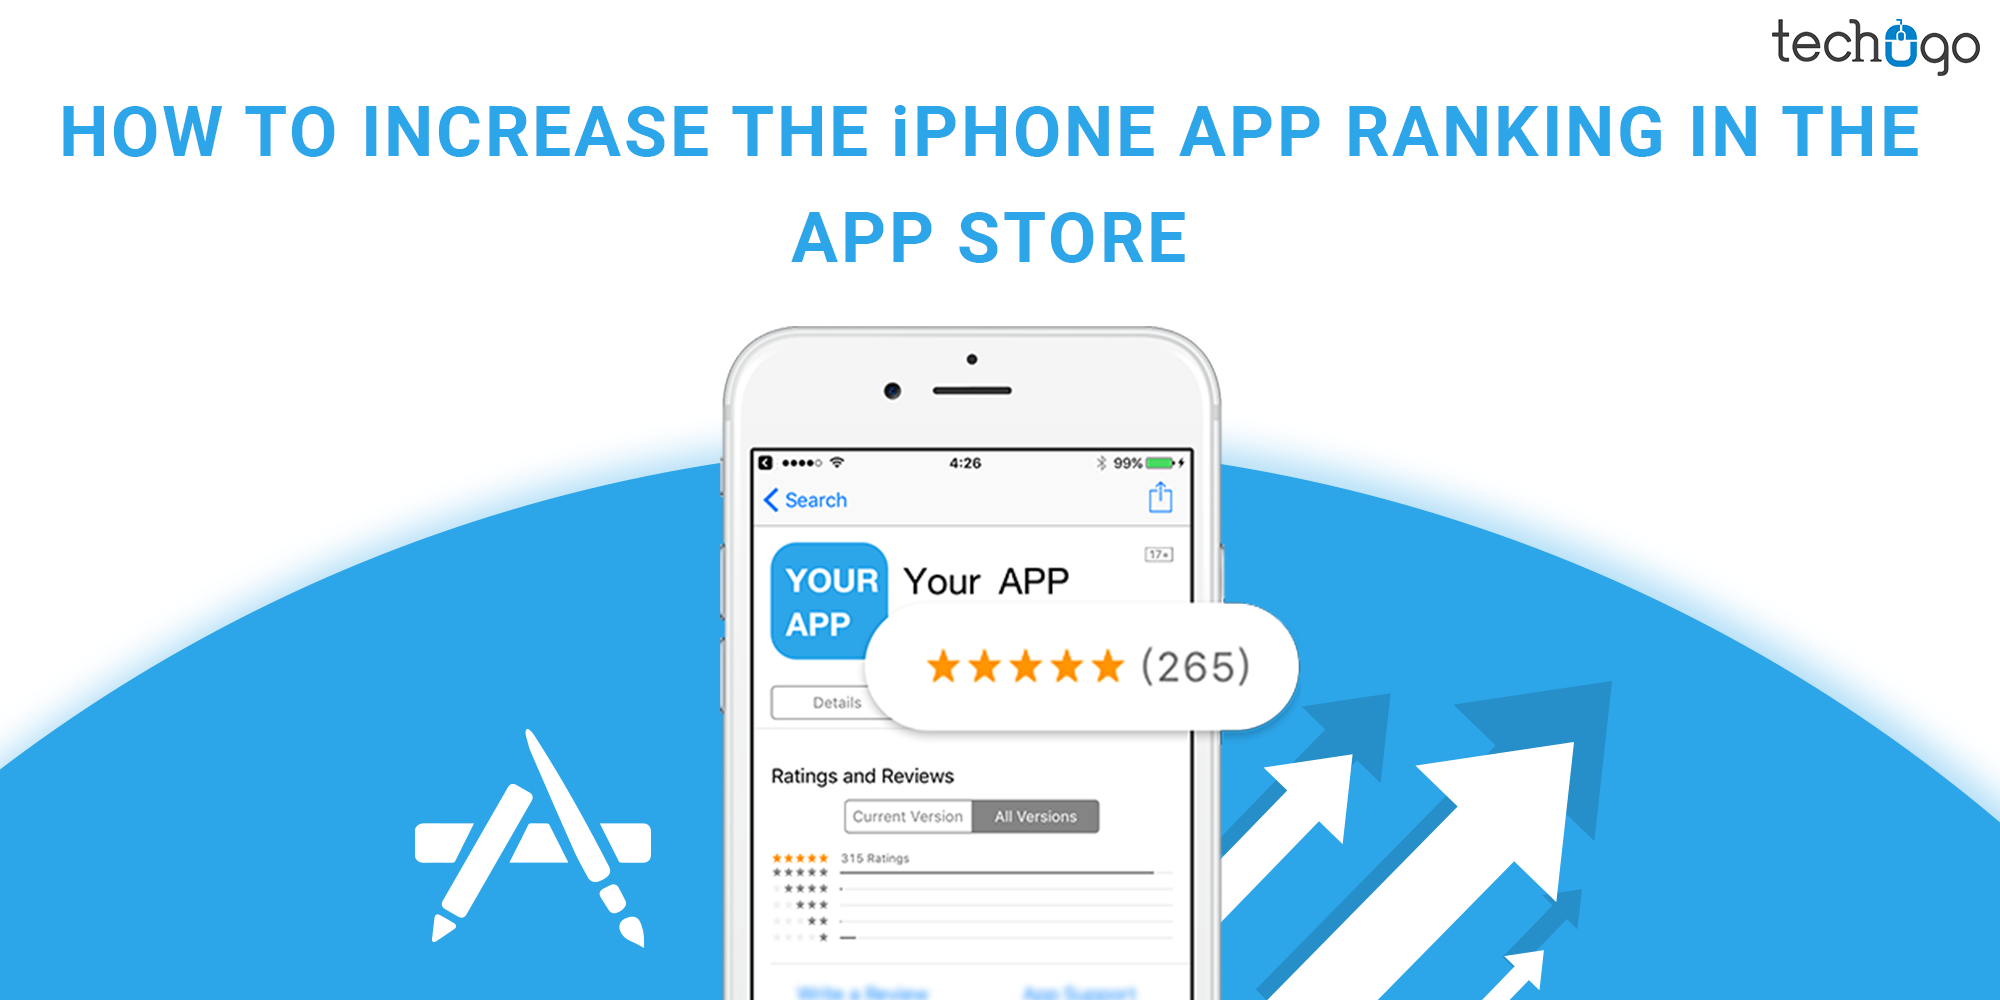 How To Increase The iPhone App Ranking In The App Store